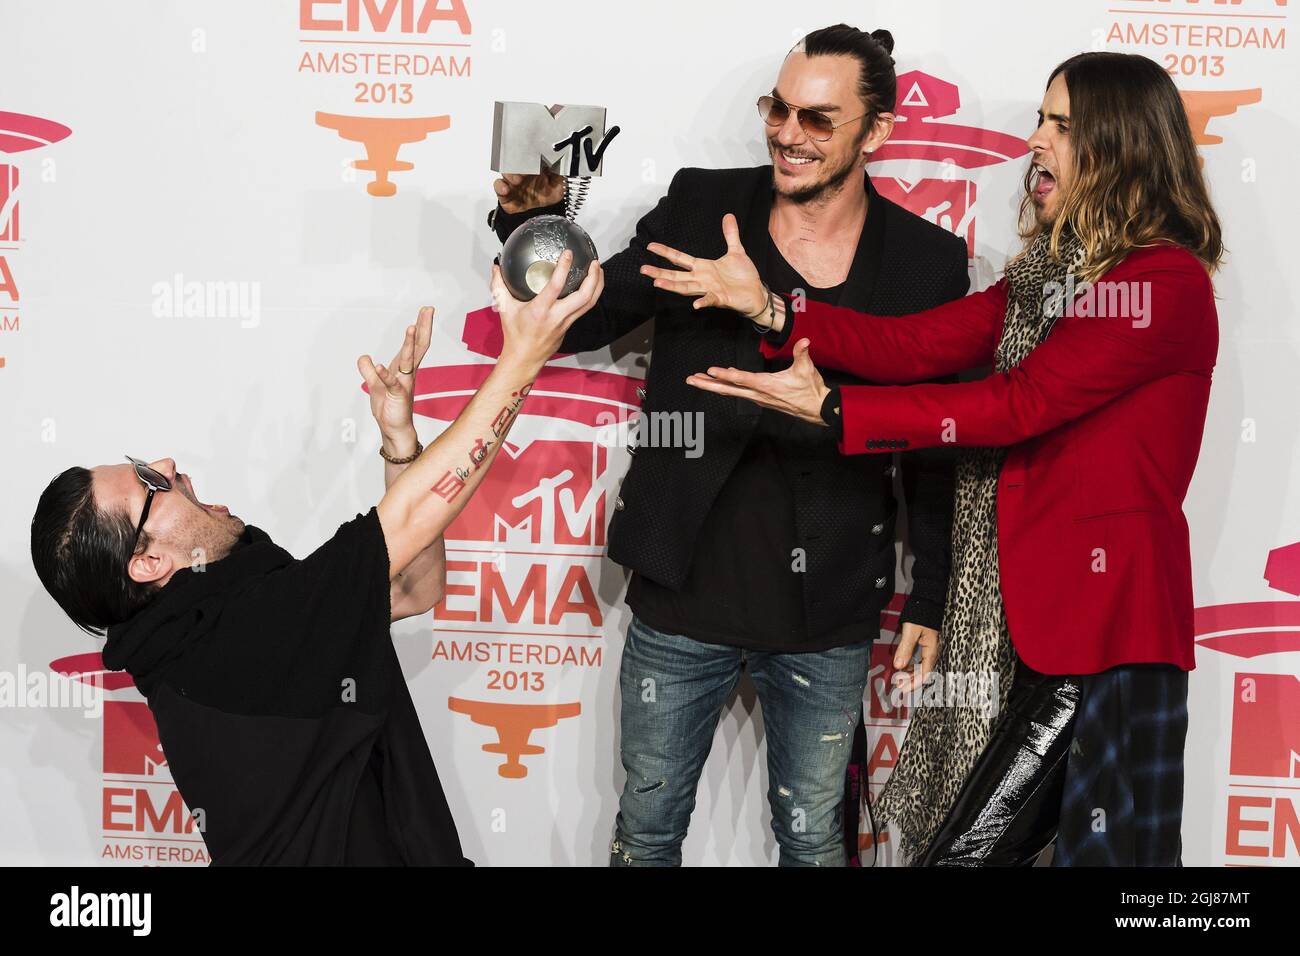 AMSTERDAM 20131110 Members of US rock band Thirty seconds to Mars (from LtoR) Tomo Milicevic, Shannon Leto and Jared Leto pose with their award during the 2013 MTV Europe Music Awards held at the Ziggo Dome in Amsterdam, Netherlands, Sunday November 10, 2013. Foto: Vilhelm Stokstad / TT / Kod 11370  Stock Photo